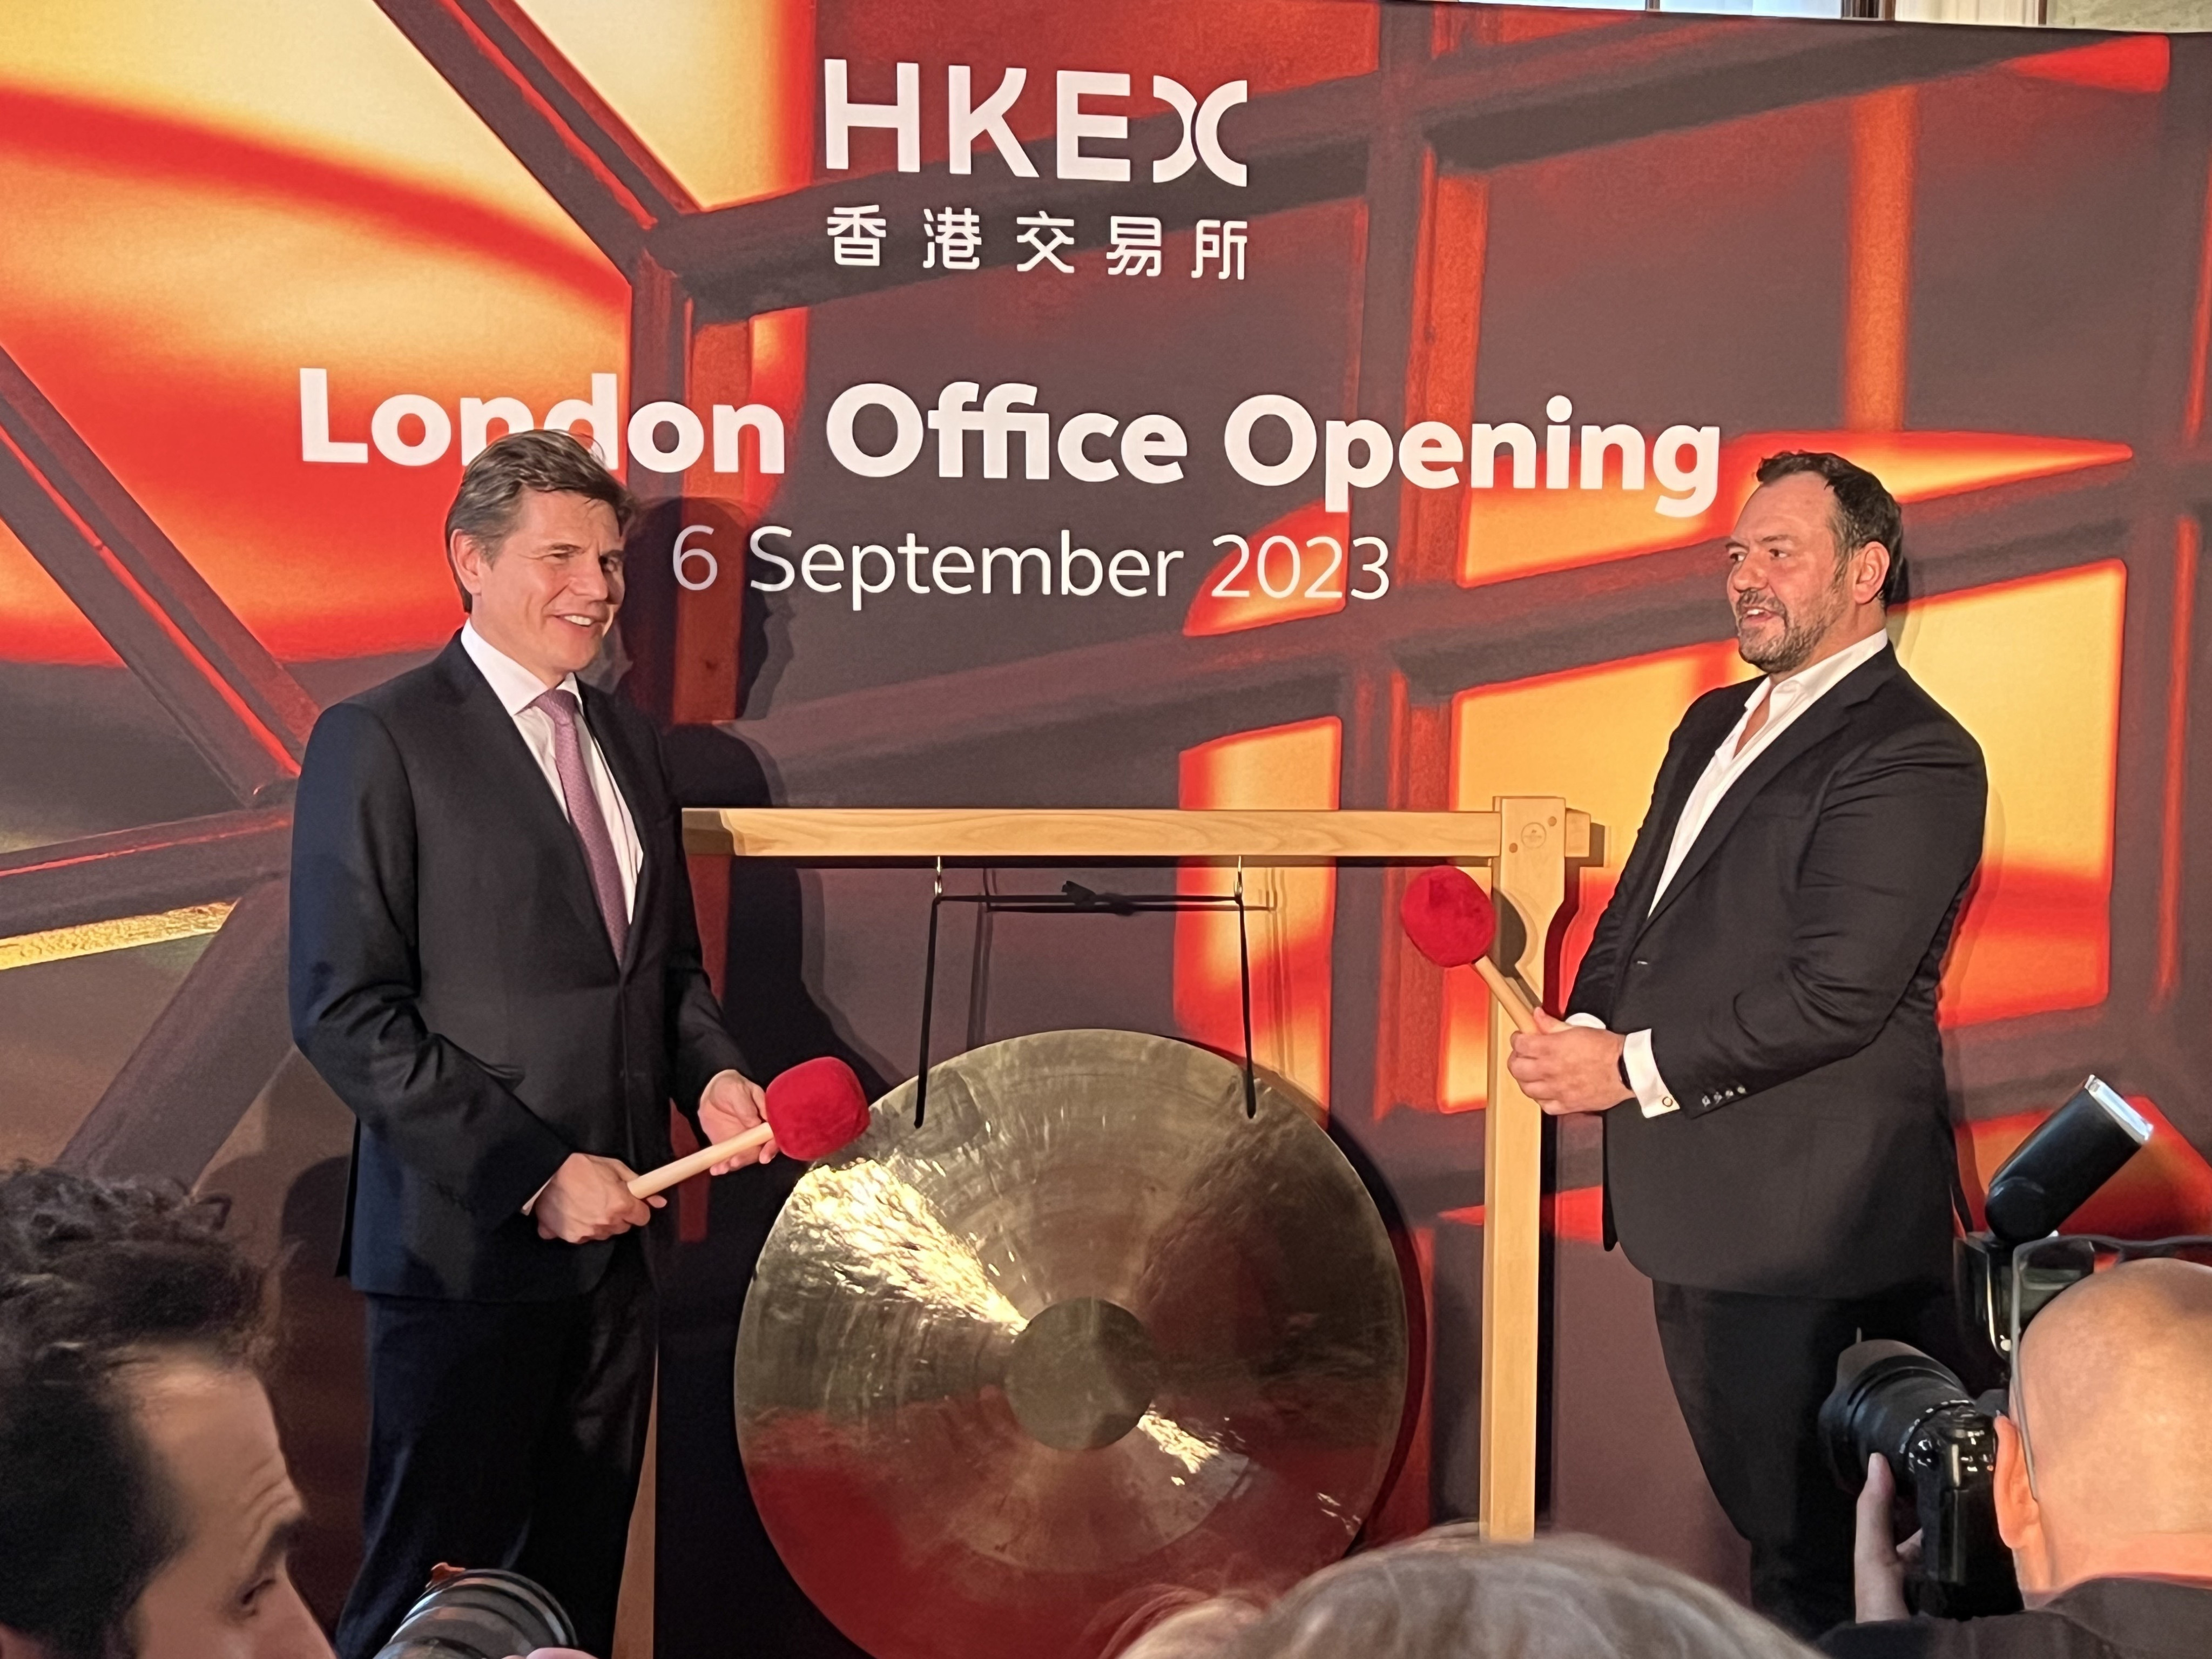 Nicolas Aguzin, Hong Exchanges and Clearing (HKEX) CEO, left, and Kevin Rideout, HKEX’s co-head of sales and marketing, ring a ceremonial gong to celebrate the opening of the bourse operator’s new office in London on September 6, 2023. Photo: Chad Bray